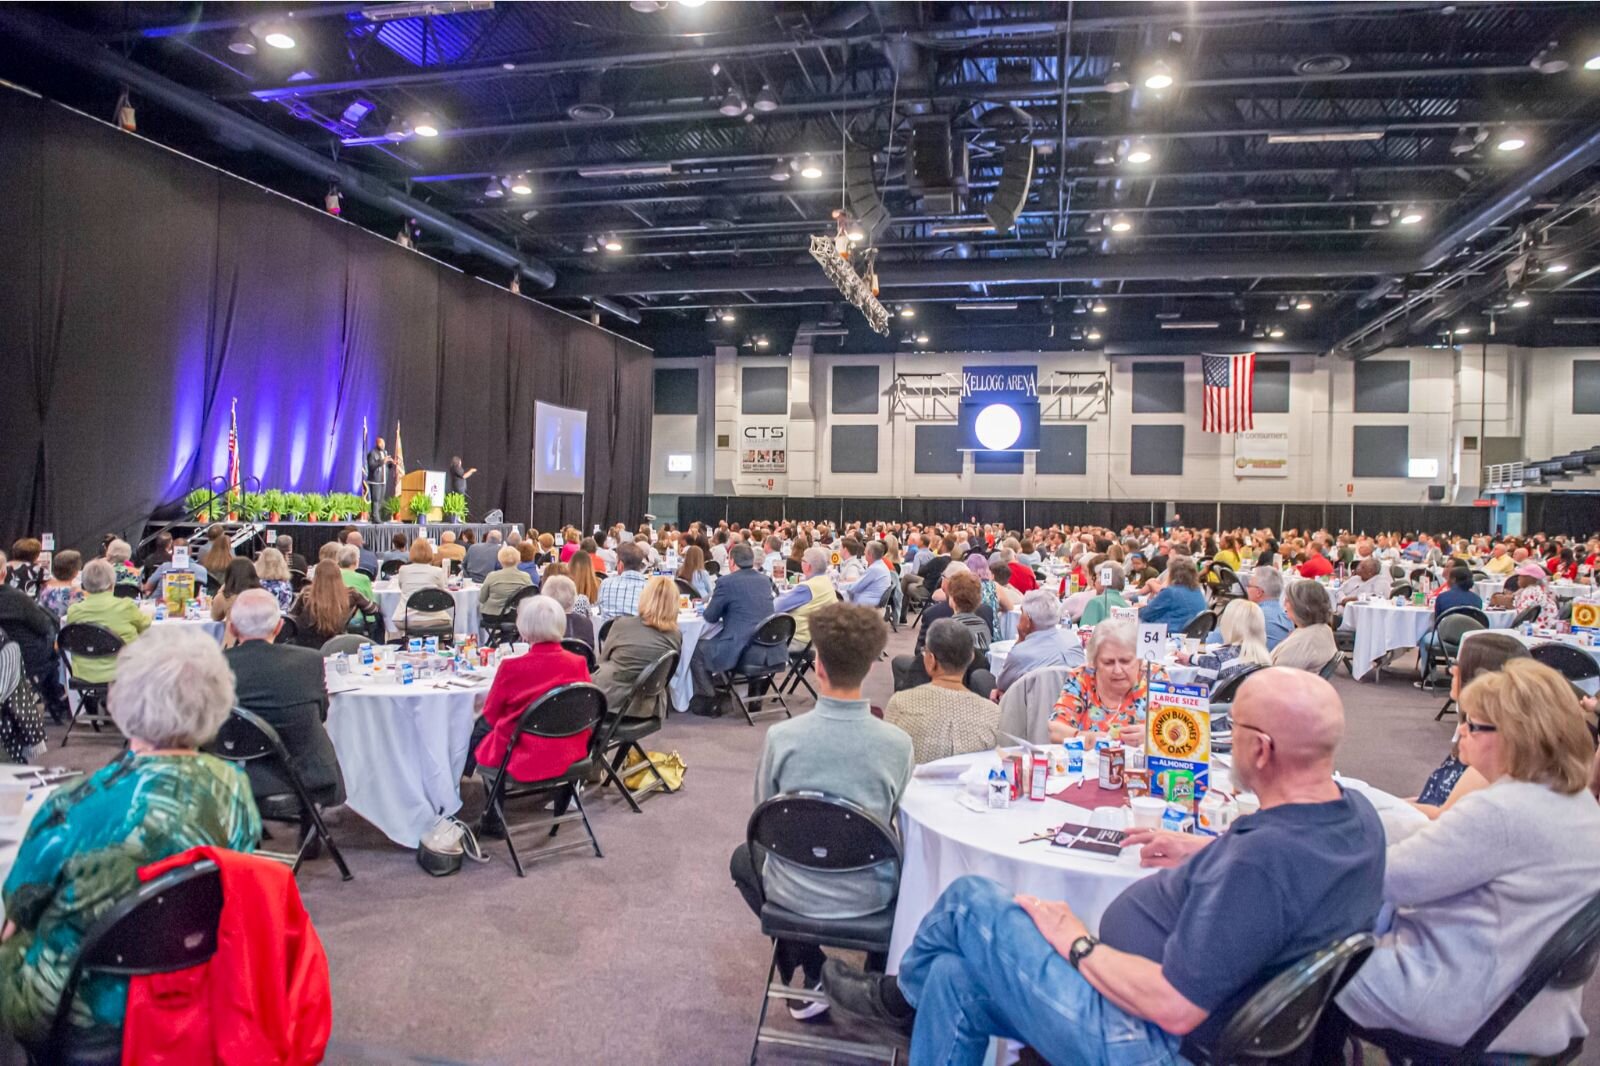 Kellogg Arena hosted the Community Prayer Breakfast again this year. 